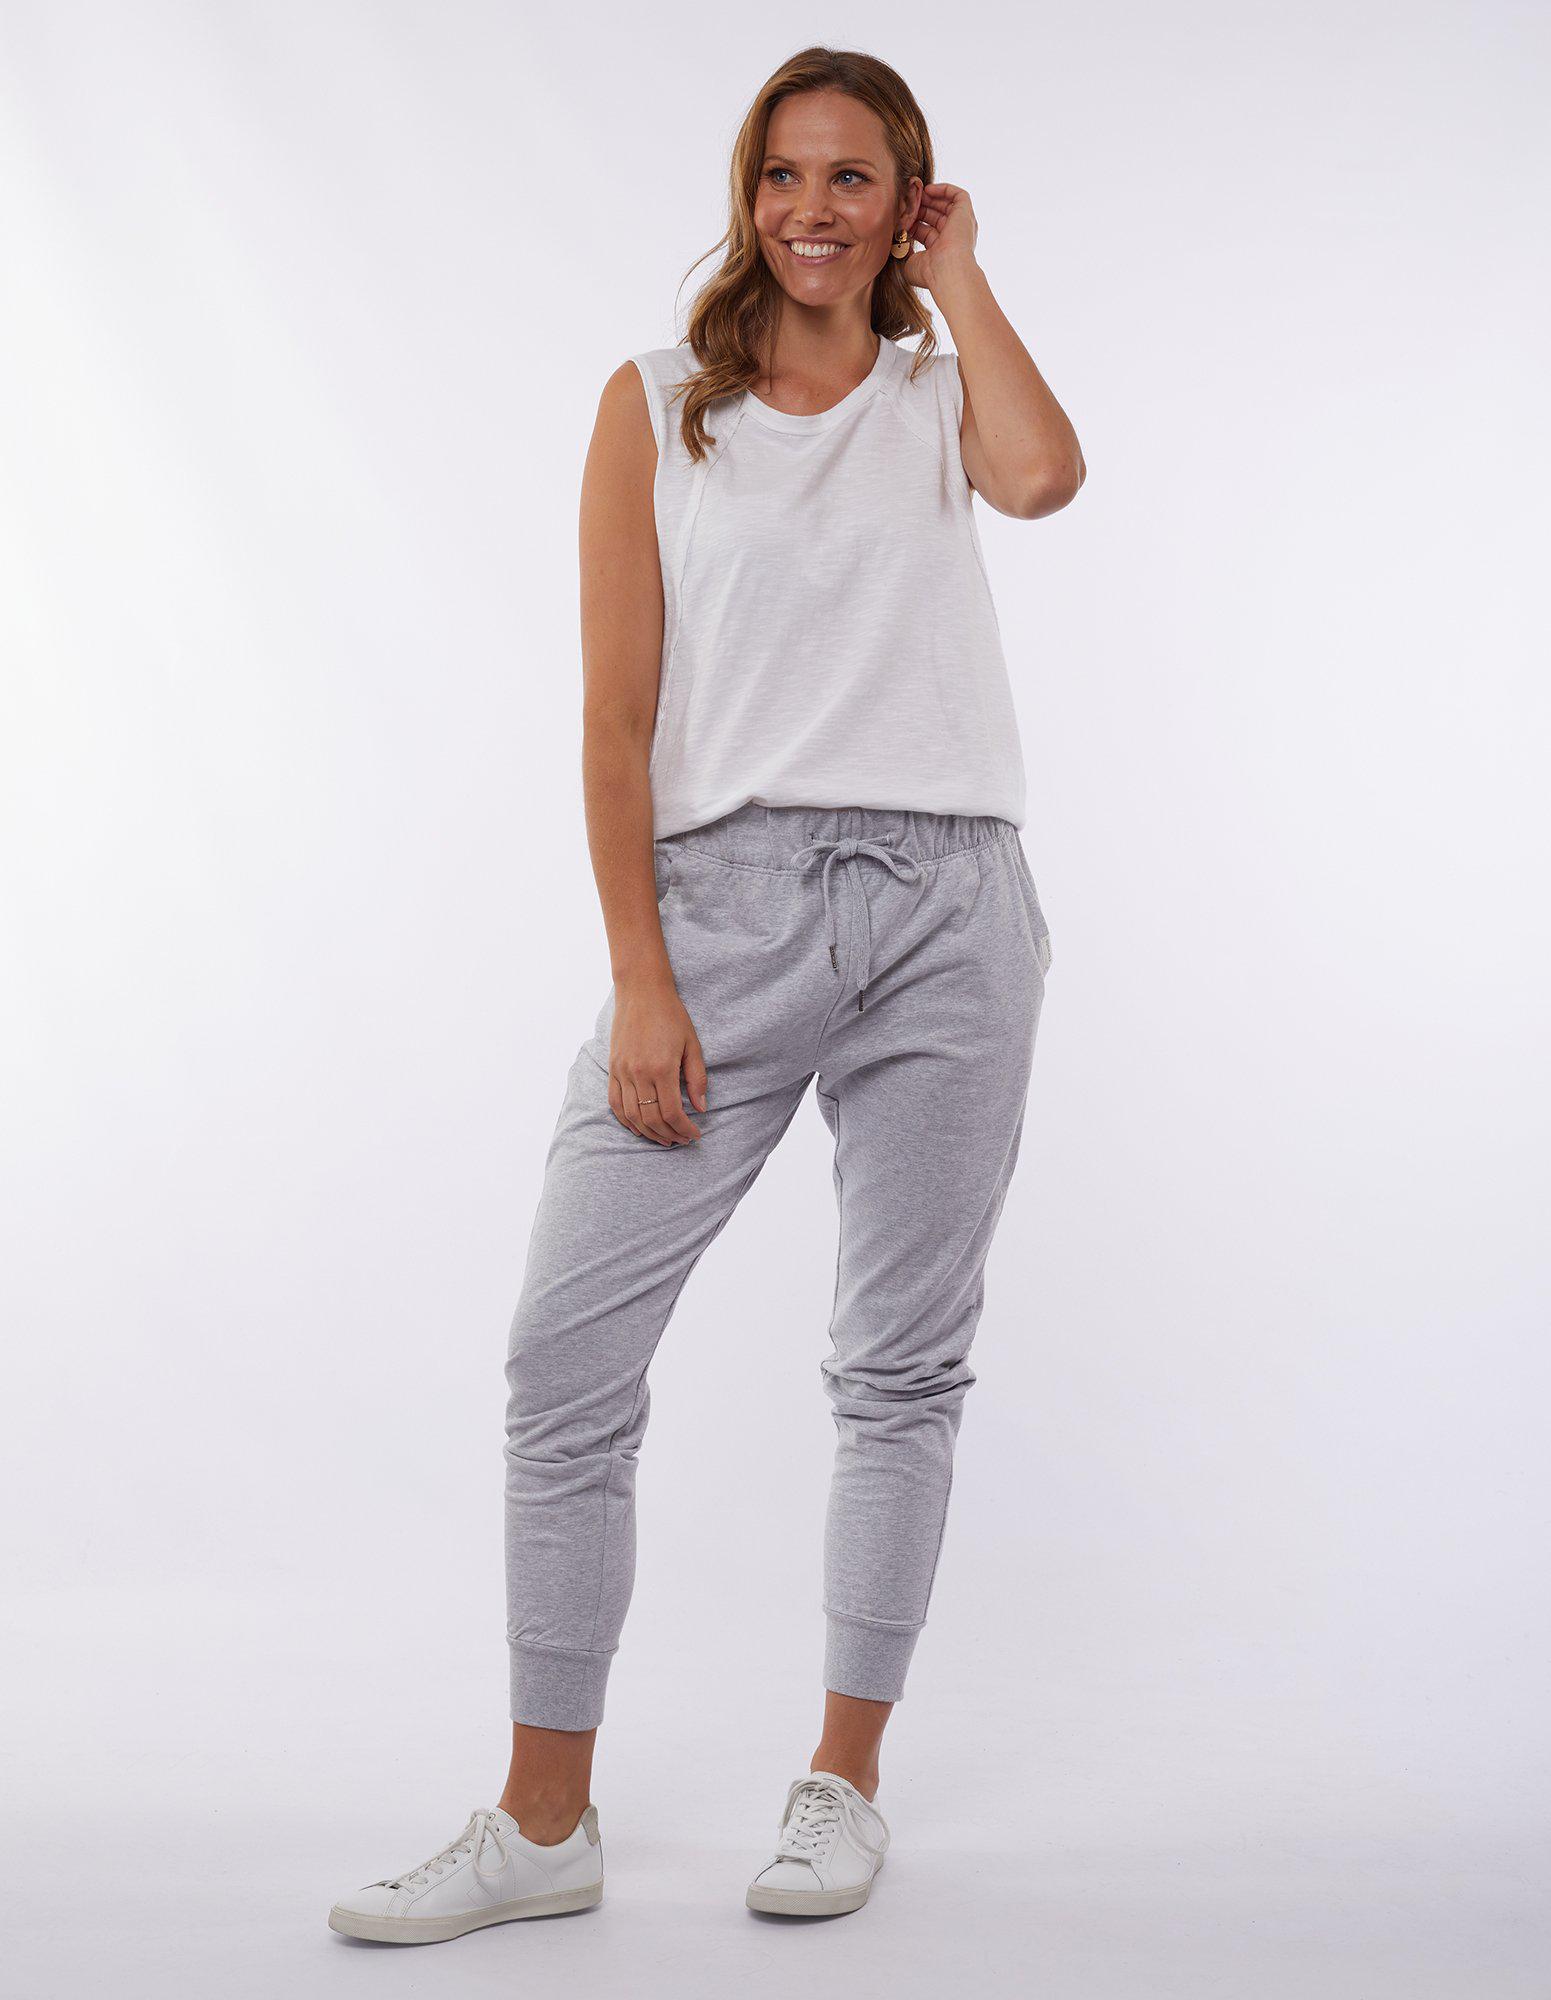 Lazy Days Pants - Grey Marle - Foxwood - FUDGE Gifts Home Lifestyle